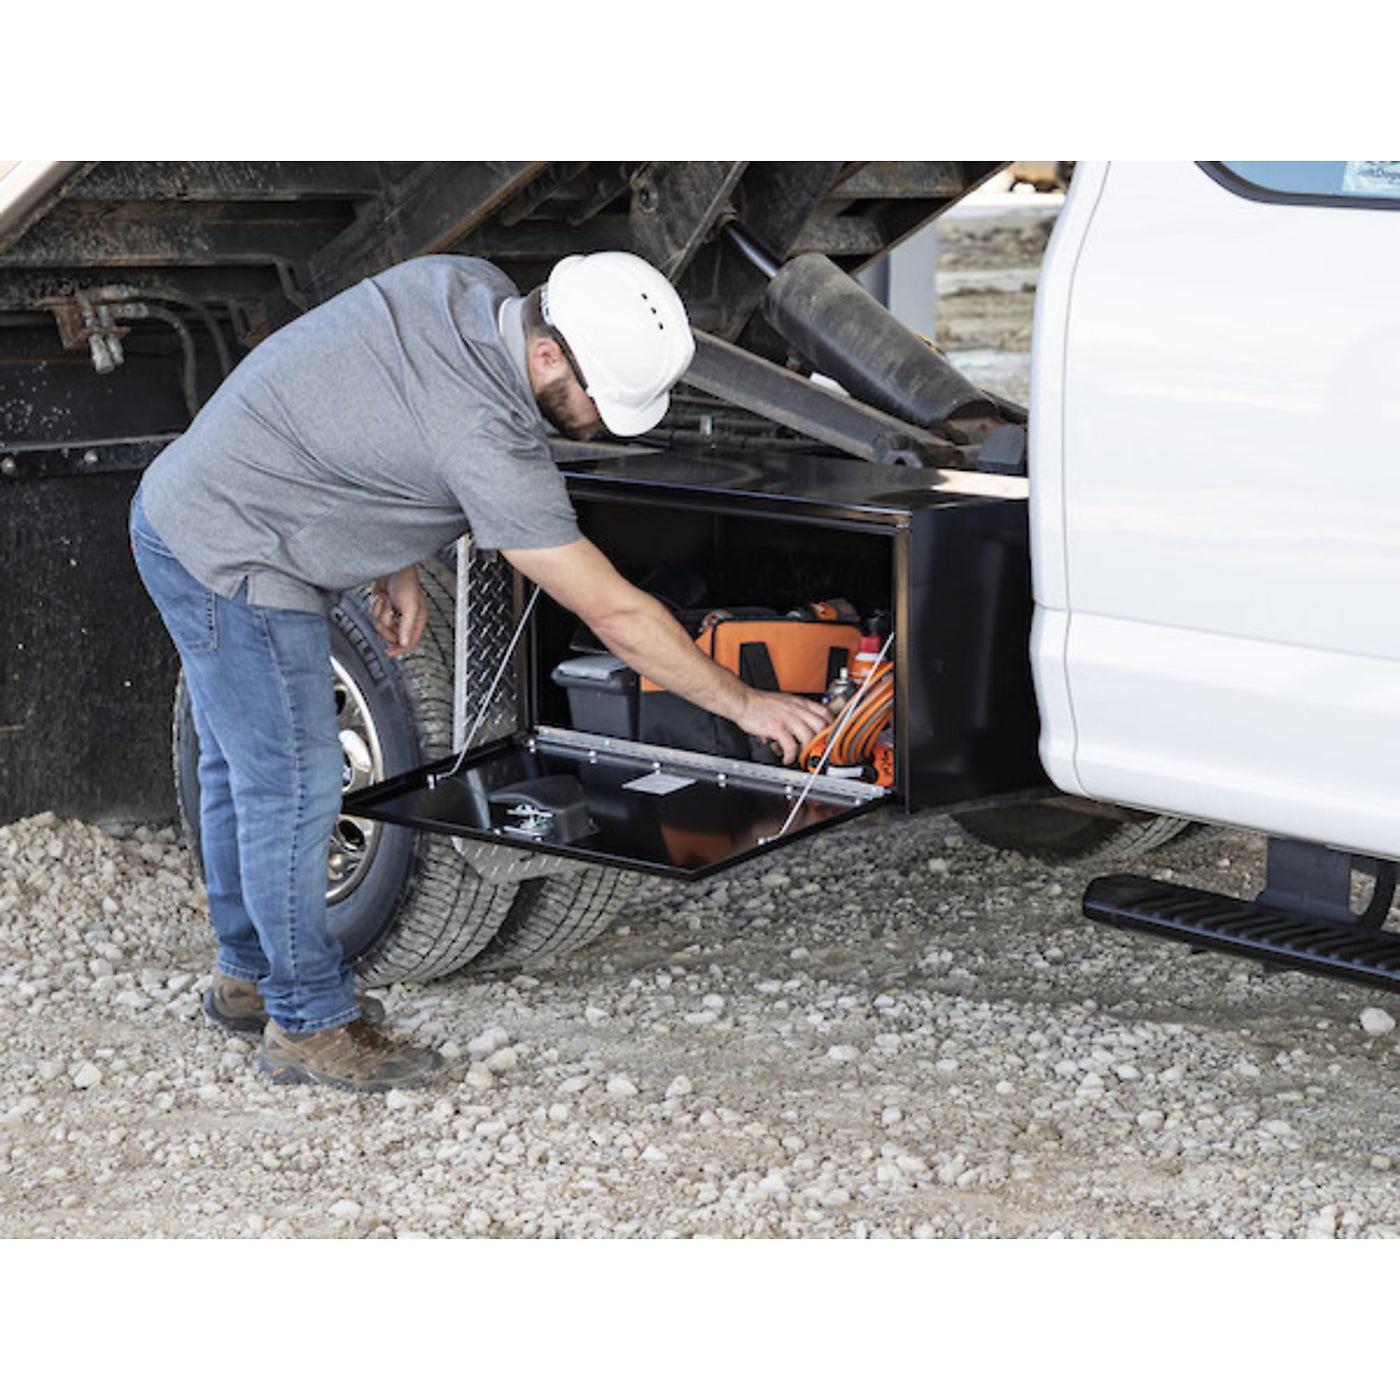 Underbody Truck Box, Width 48 in, Material Carbon Steel, Color Finish Glossy Black - $285